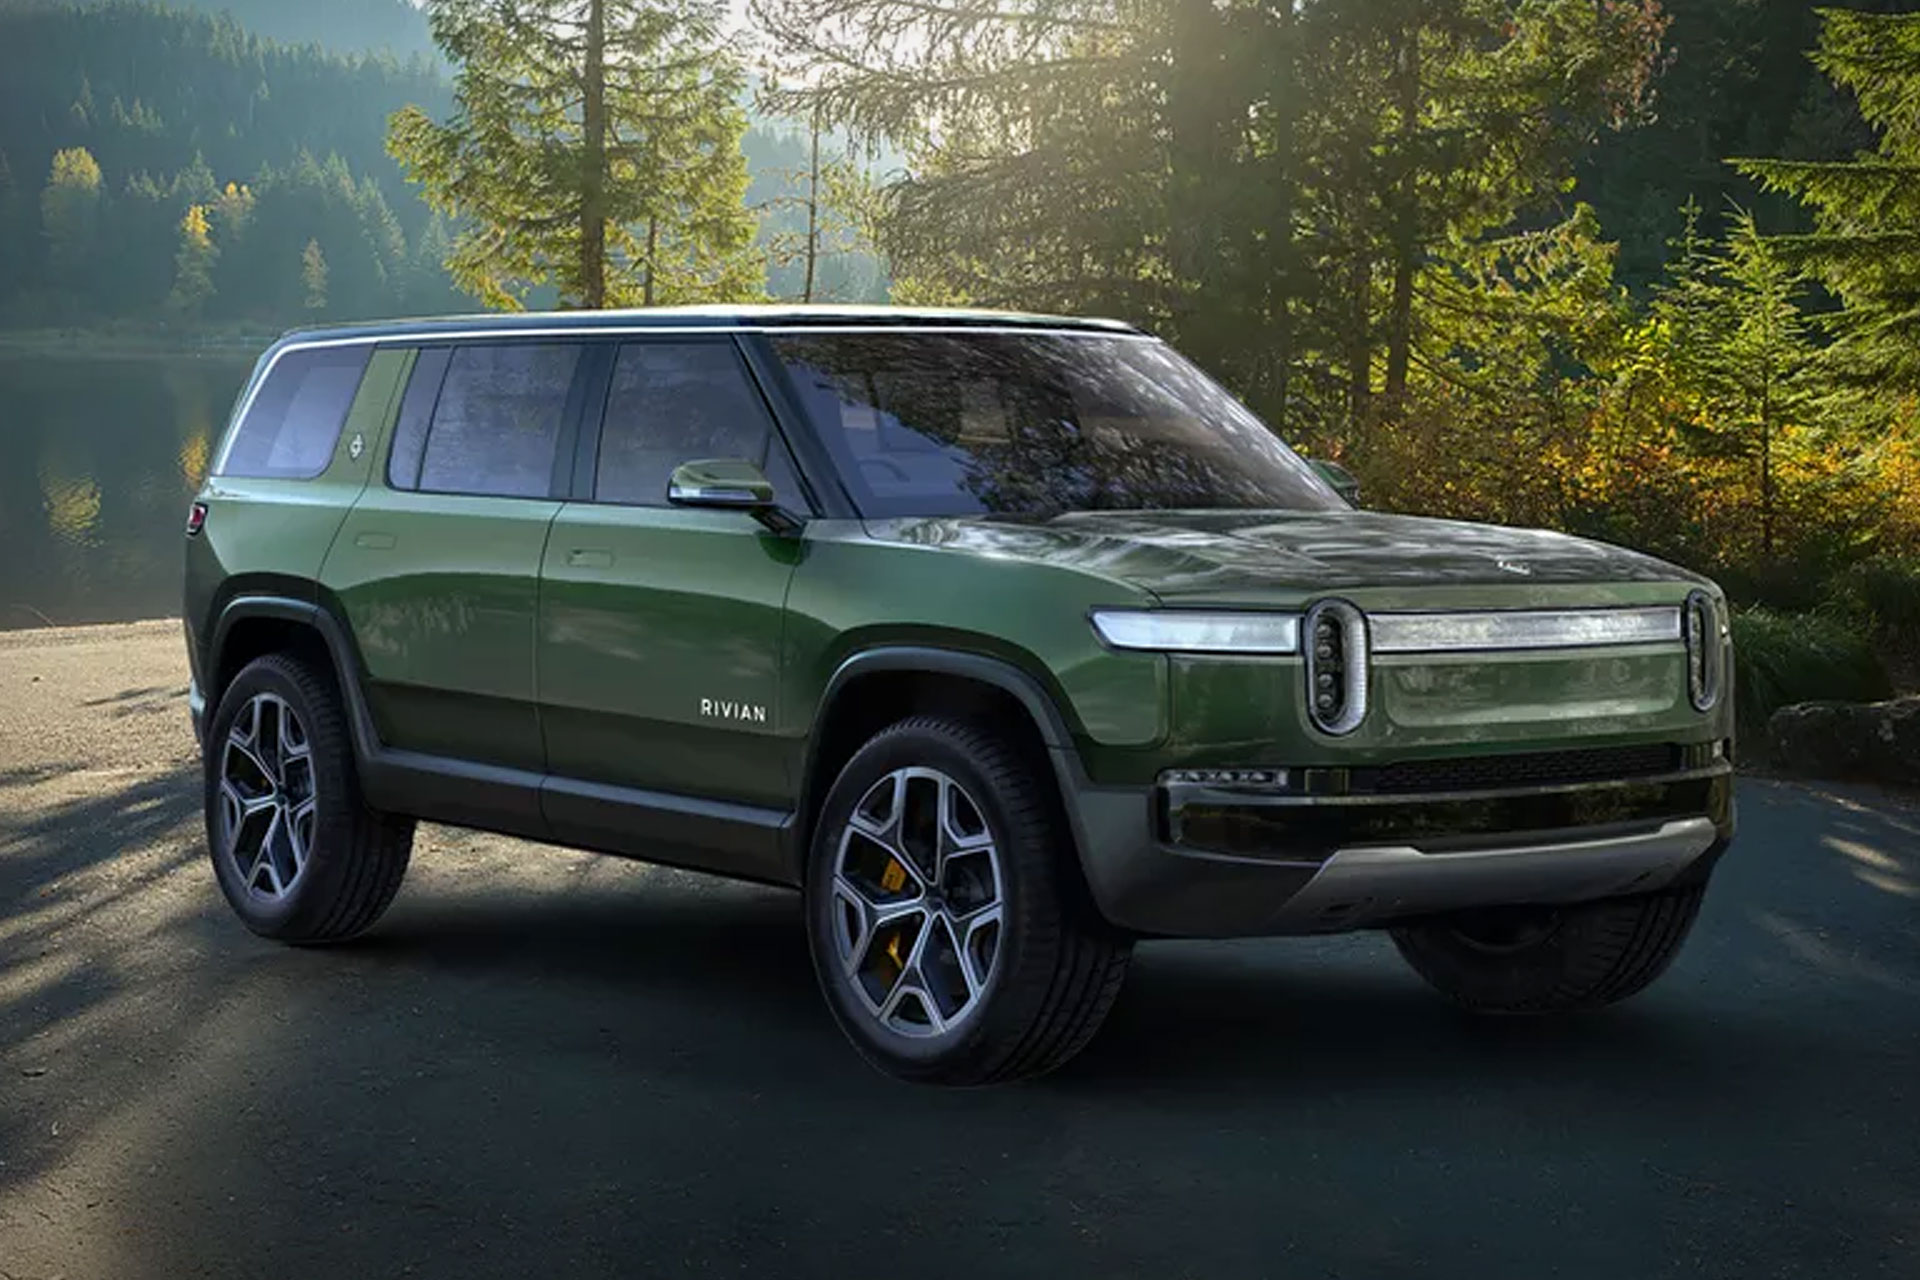 Rivian R1S Electric SUV Uncrate